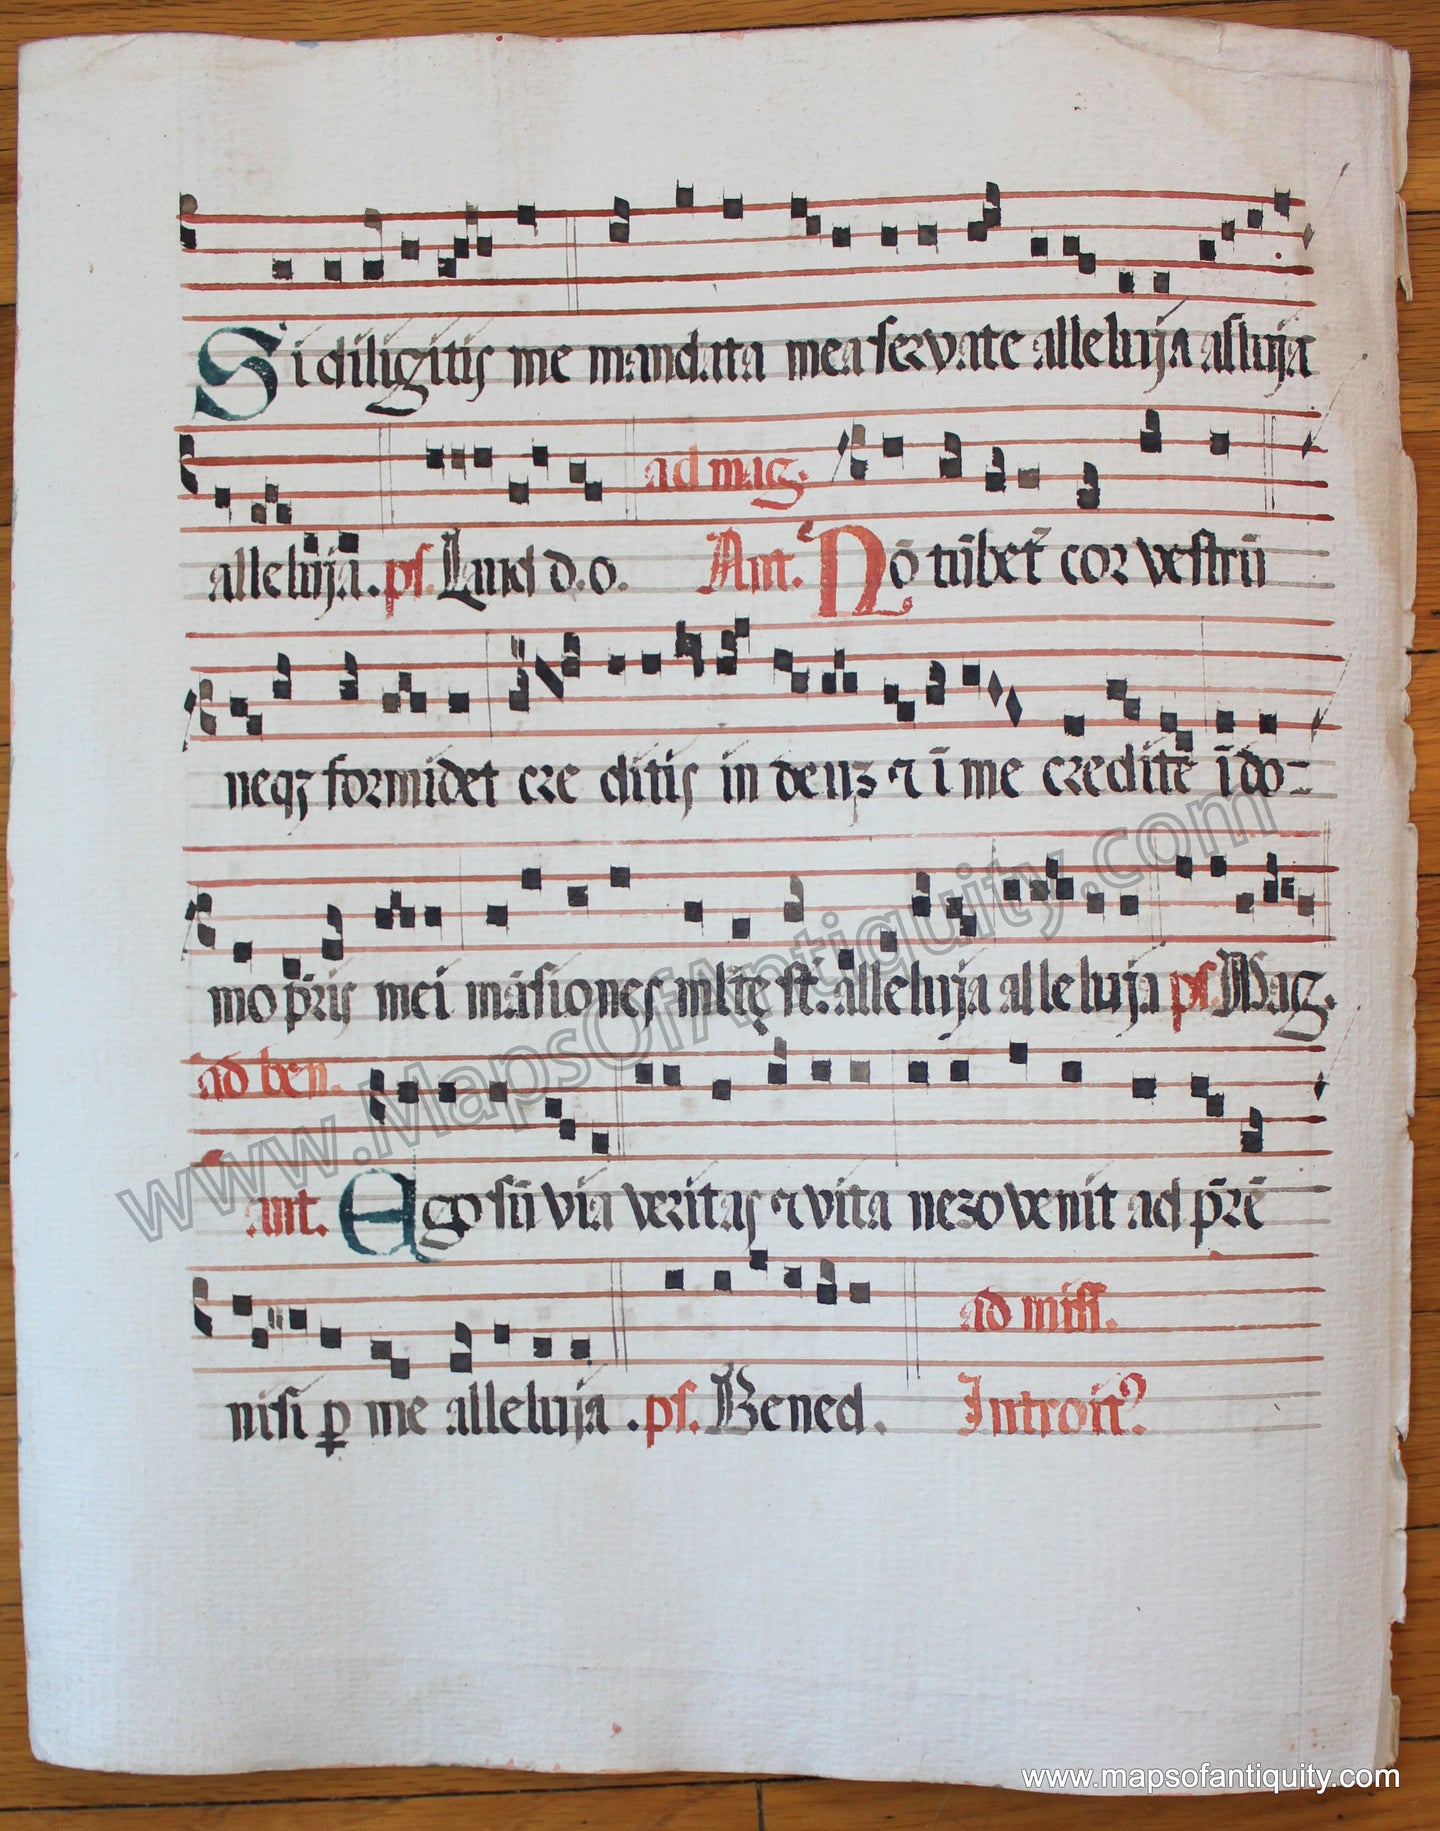 Hand-Painted-Antique-Sheet-Music-on-Paper-Antique-Sheet-Music-p.-67-Later-Middle-Ages-Unknown-Antique-Sheet-Music-14th-15th-century-Maps-of-Antiquity